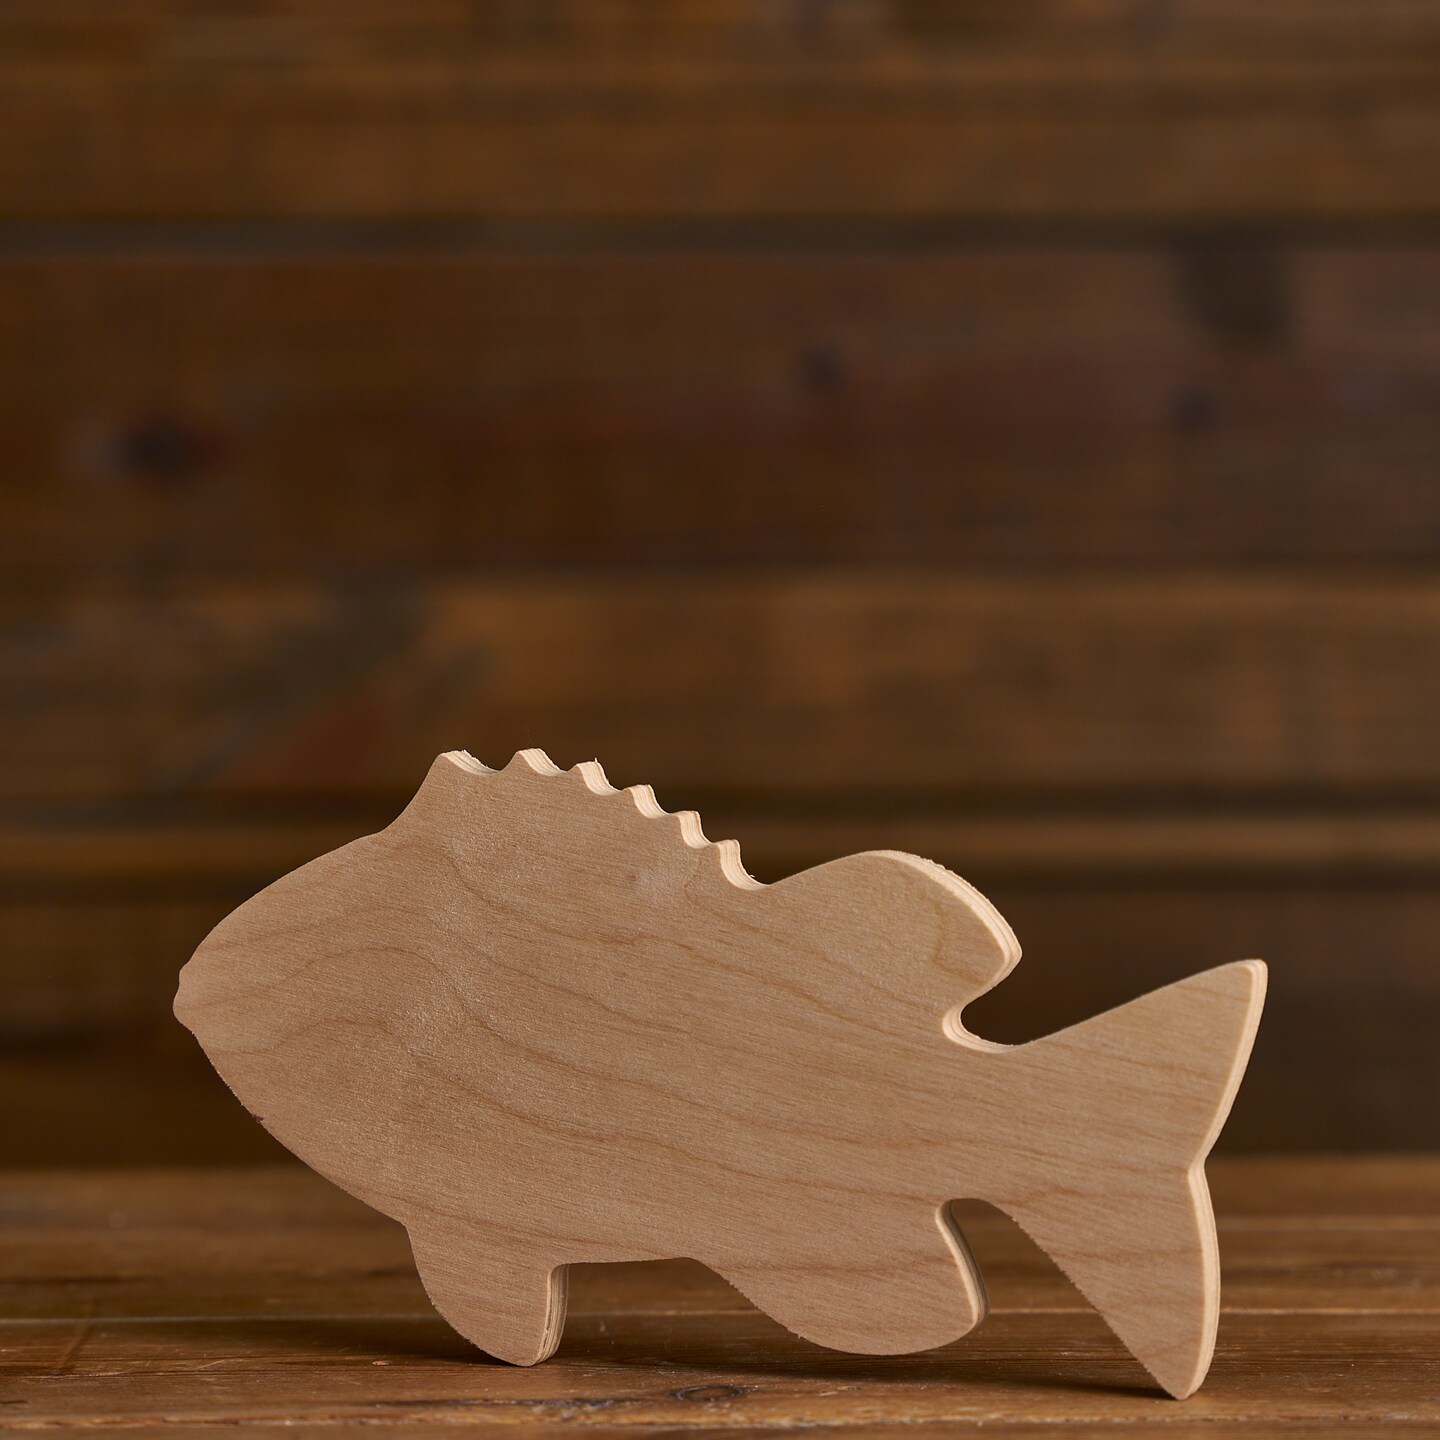 8.6 in. Unfinished Wooden Chunky Fish Shape